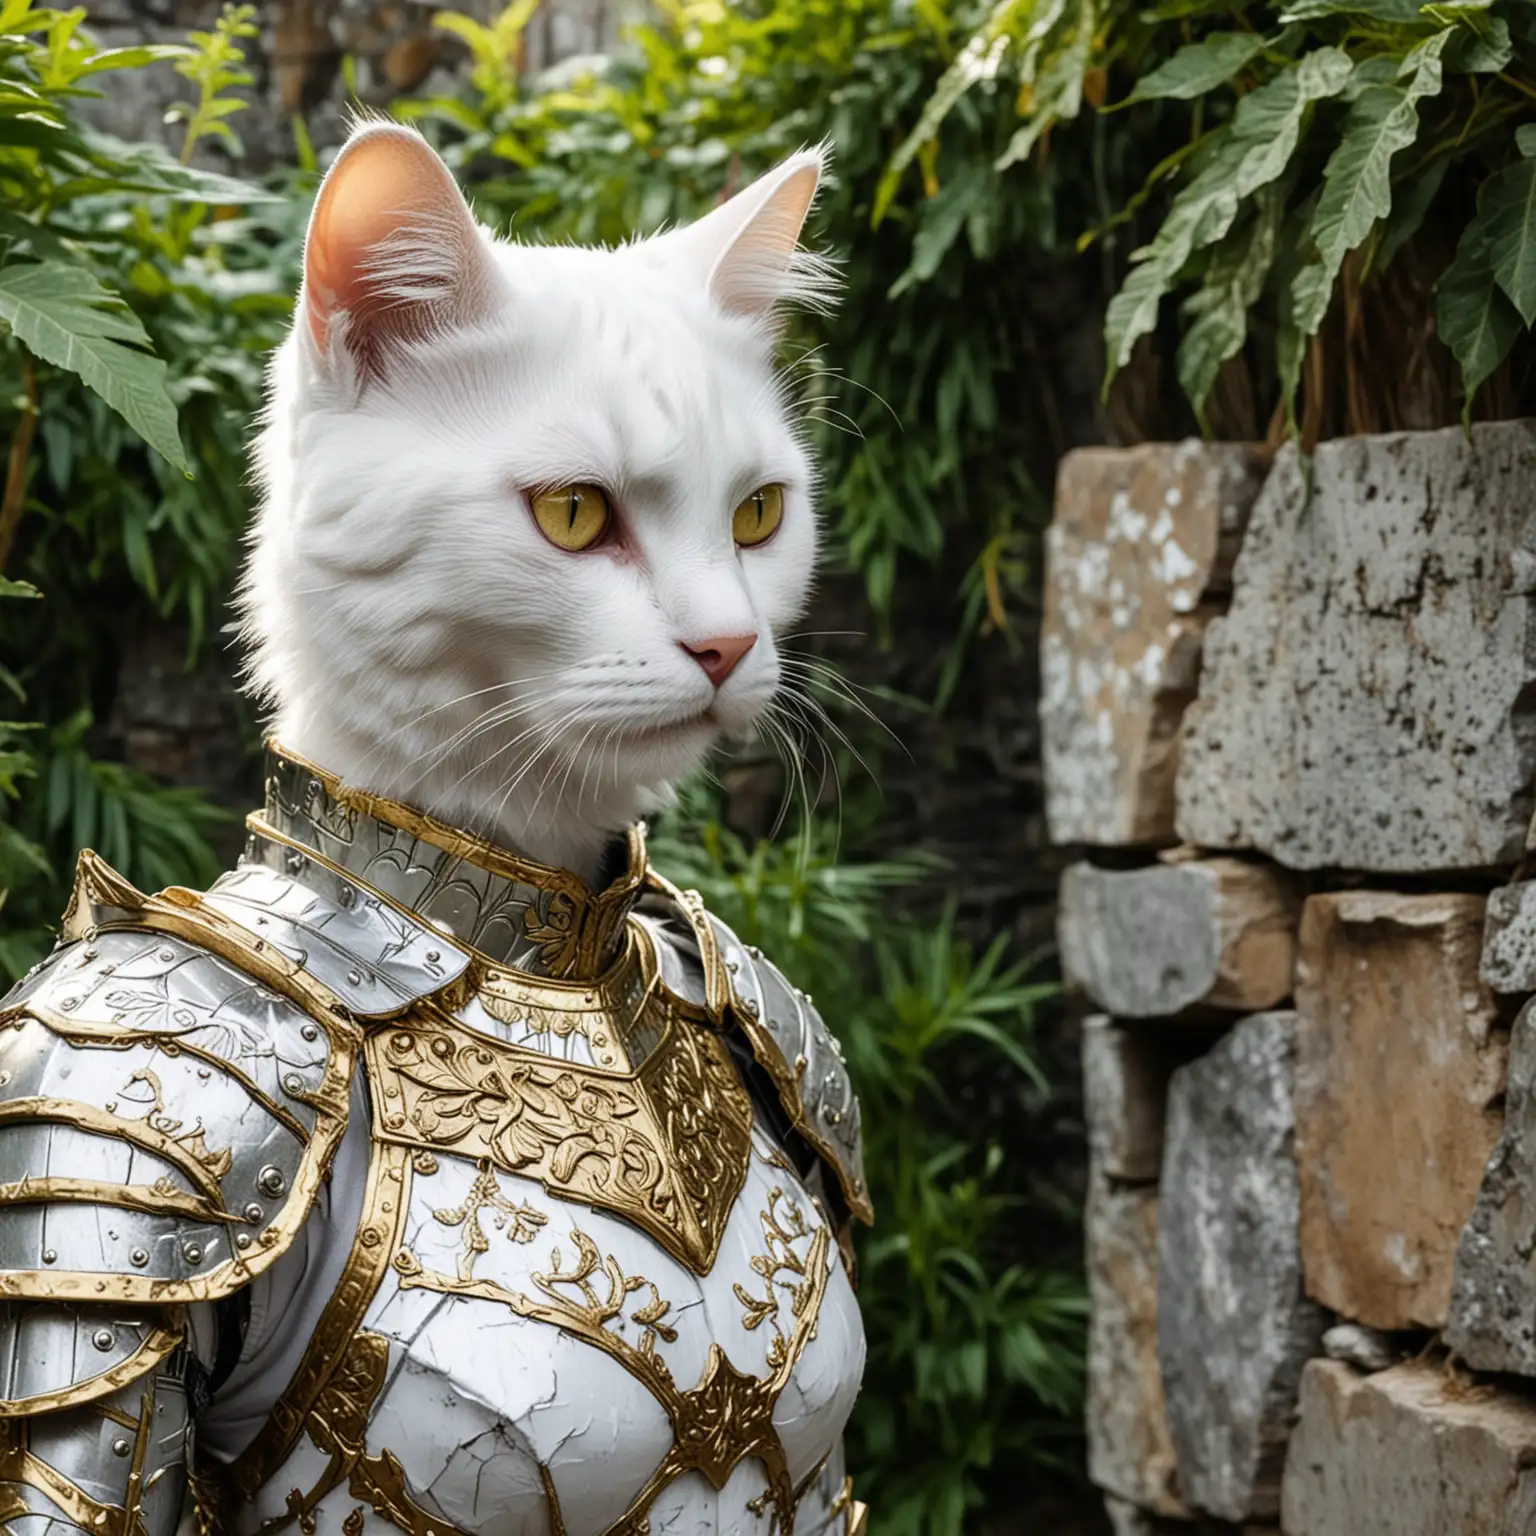 white furry cat-girl in scrapped shiny silver armor with golden patterns with scars on her face stand in front of garden stone wall covered by lush plants